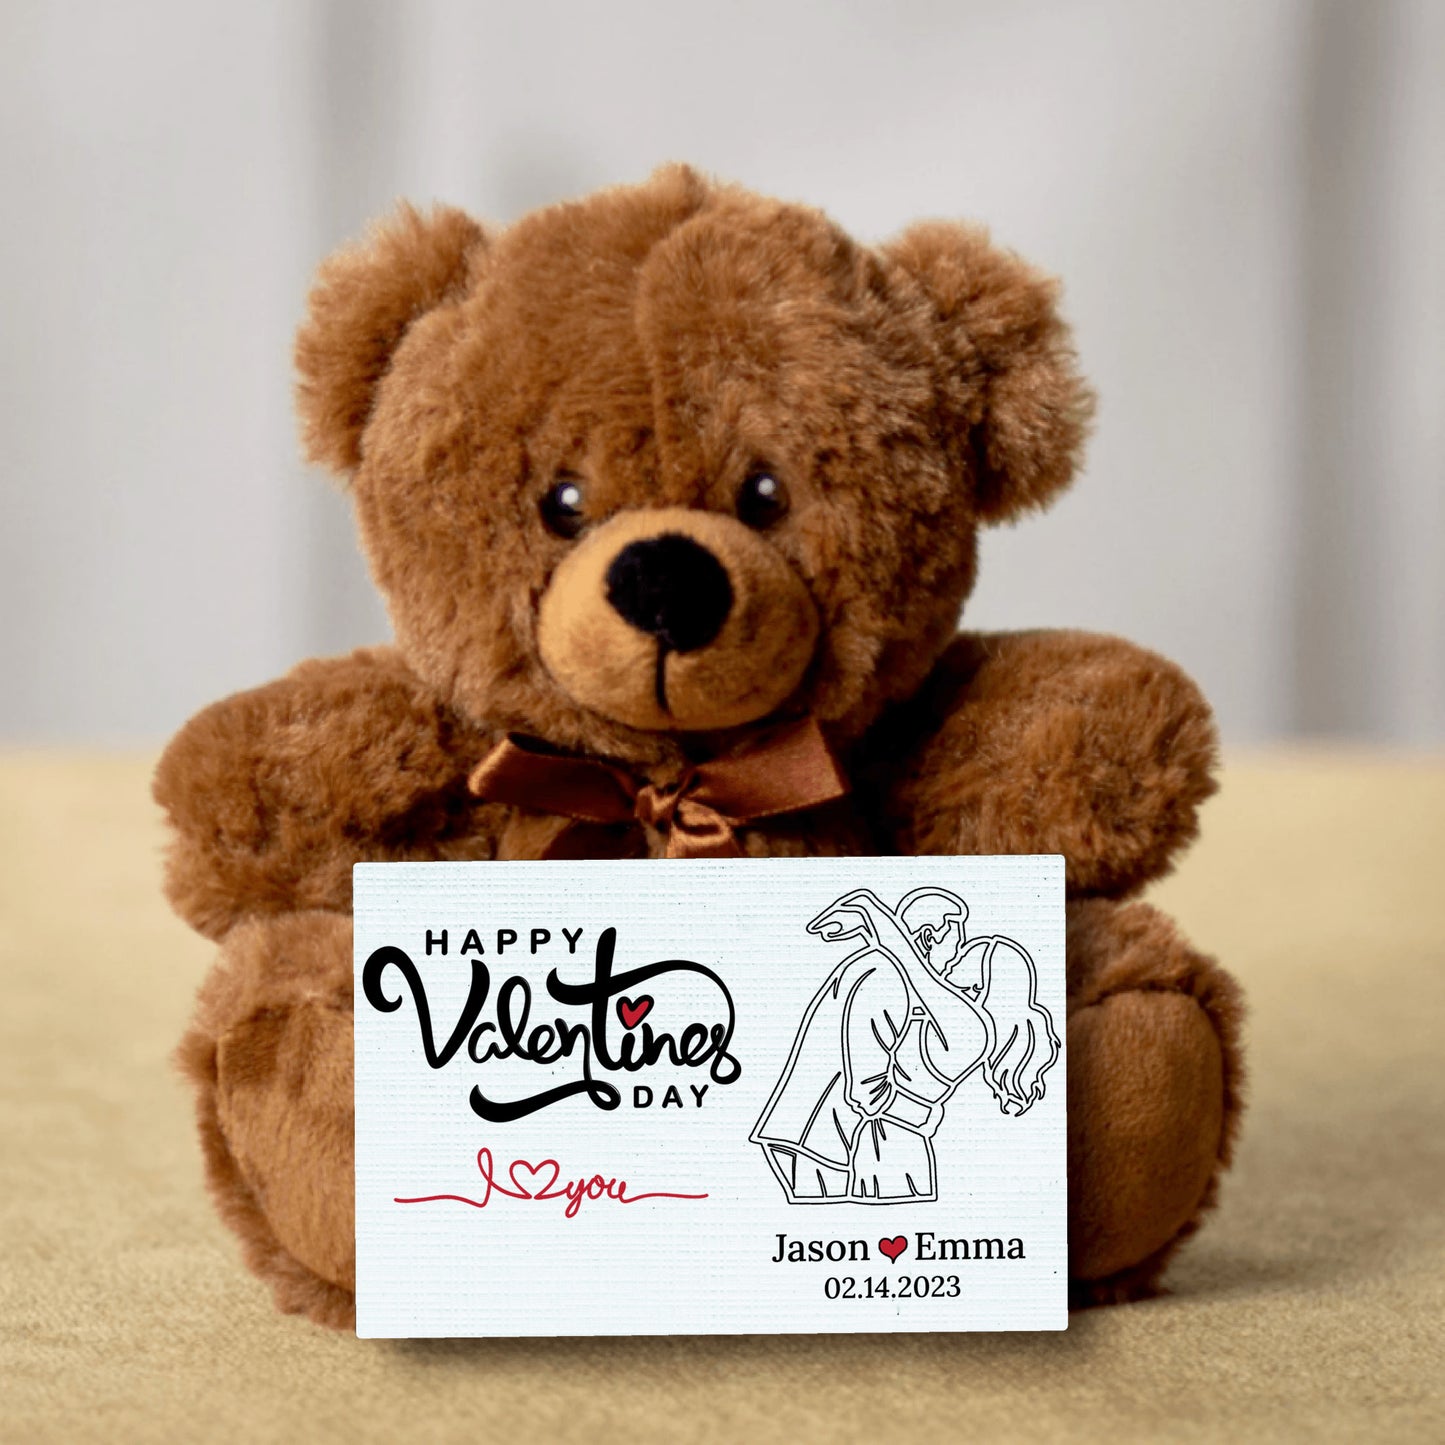 Personalized Teddy Bear - Custom Message Card With Happy Valentines Couple - Your Own Personal Photo - Perfect Valentine's Gift